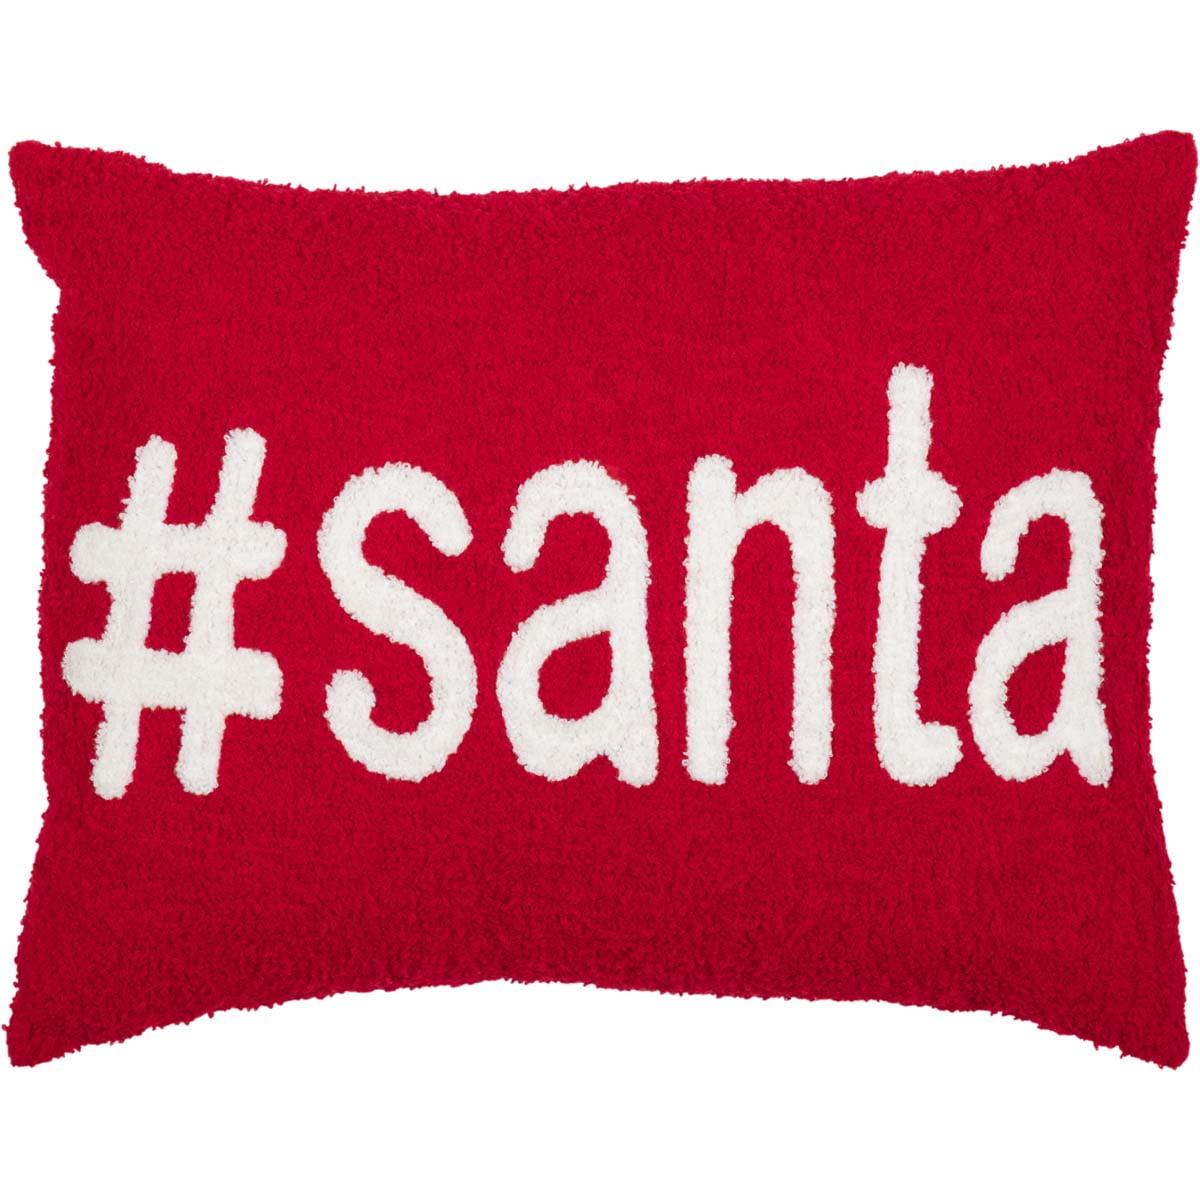 VHC Brands Christmas Holiday Pillows & Throws Sanbourne Blue Seas and Greetings 14 x 18 Pillow 32071 